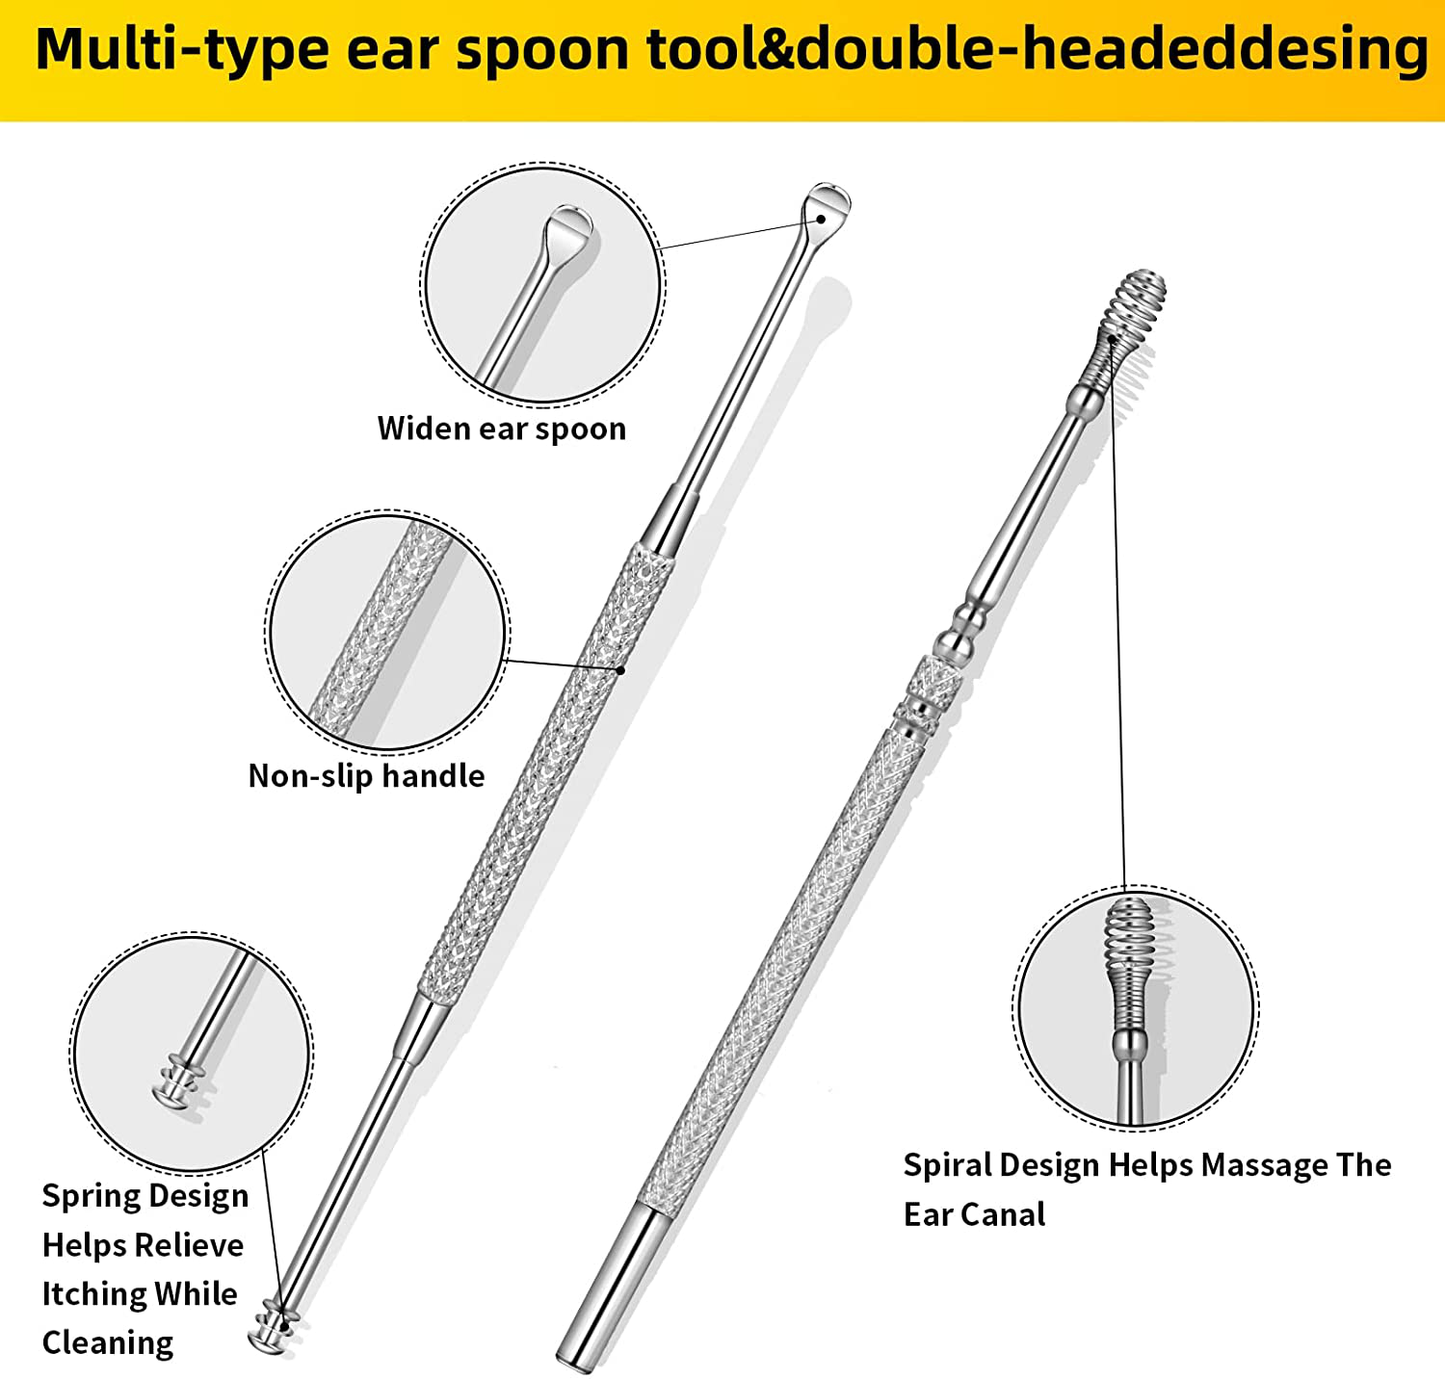 9 Pcs Ear Pick Earwax Removal Kit, Ear Cleansing Tool Set, Ear Wax Removal Tool, Ear Curette Ear Wax Remover Tool with a Cleaning Brush and Storage Box, Medical Grade, for Children and Adults,Silver